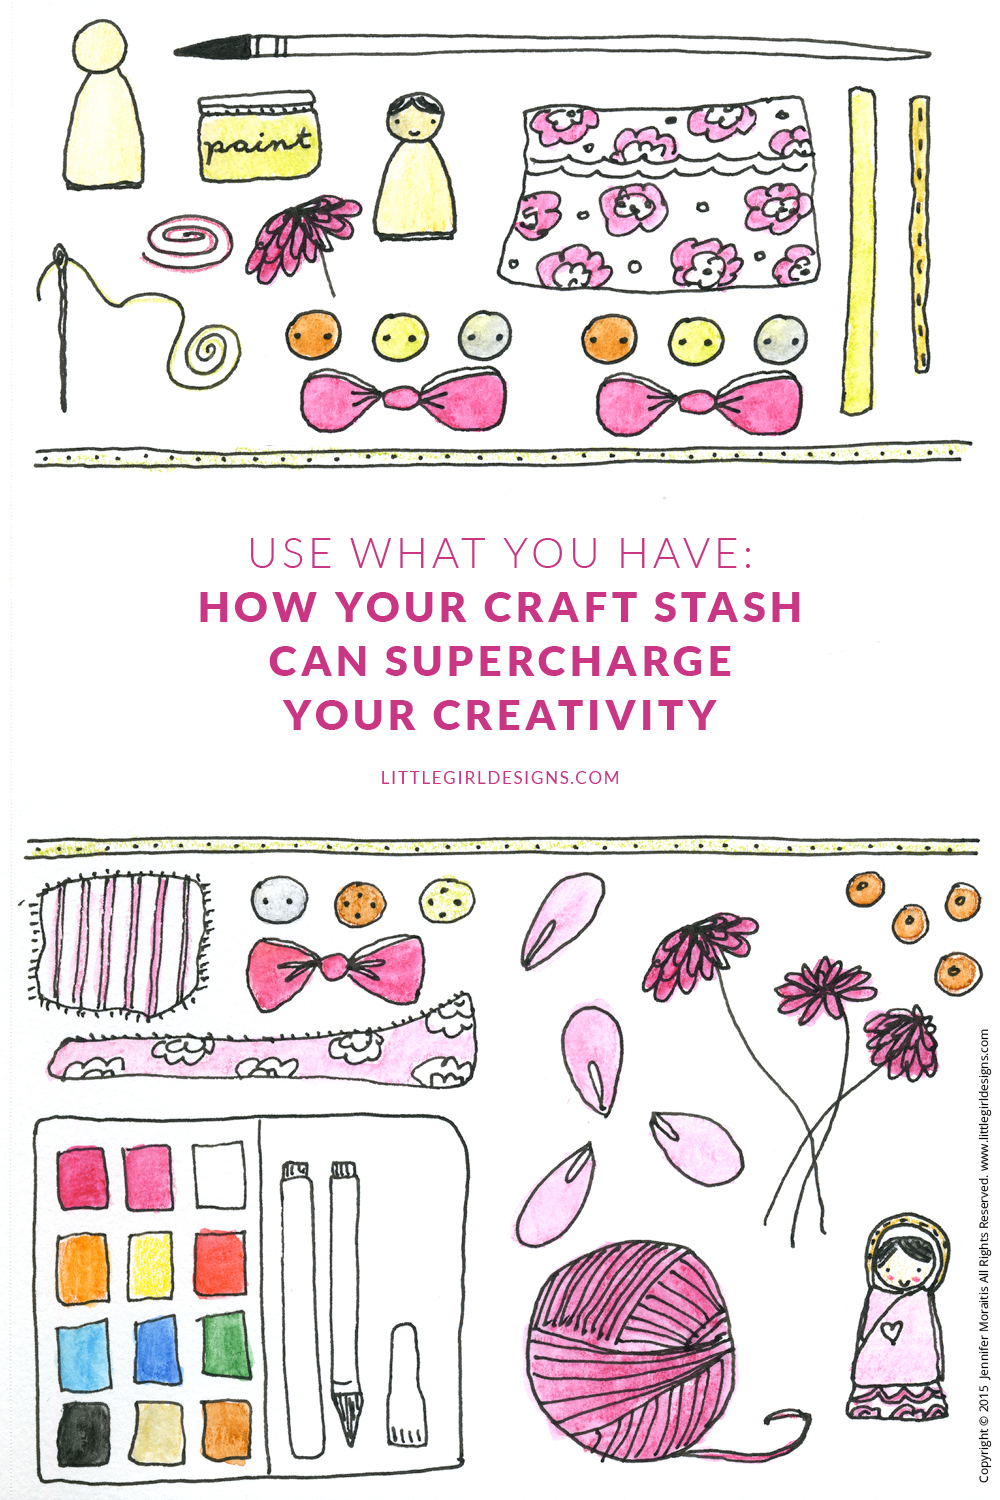 Use What You Have: How Your Craft Stash Can Supercharge Your Creativity - You look at your craft drawers and sigh, "What a mess!" or walk into your gorgeous craft room and sigh contentedly. Whatever the case, what you might not realize is you are looking at the source to some serious creativity! This is the second in a series about using what you have @littlegirldesigns.com